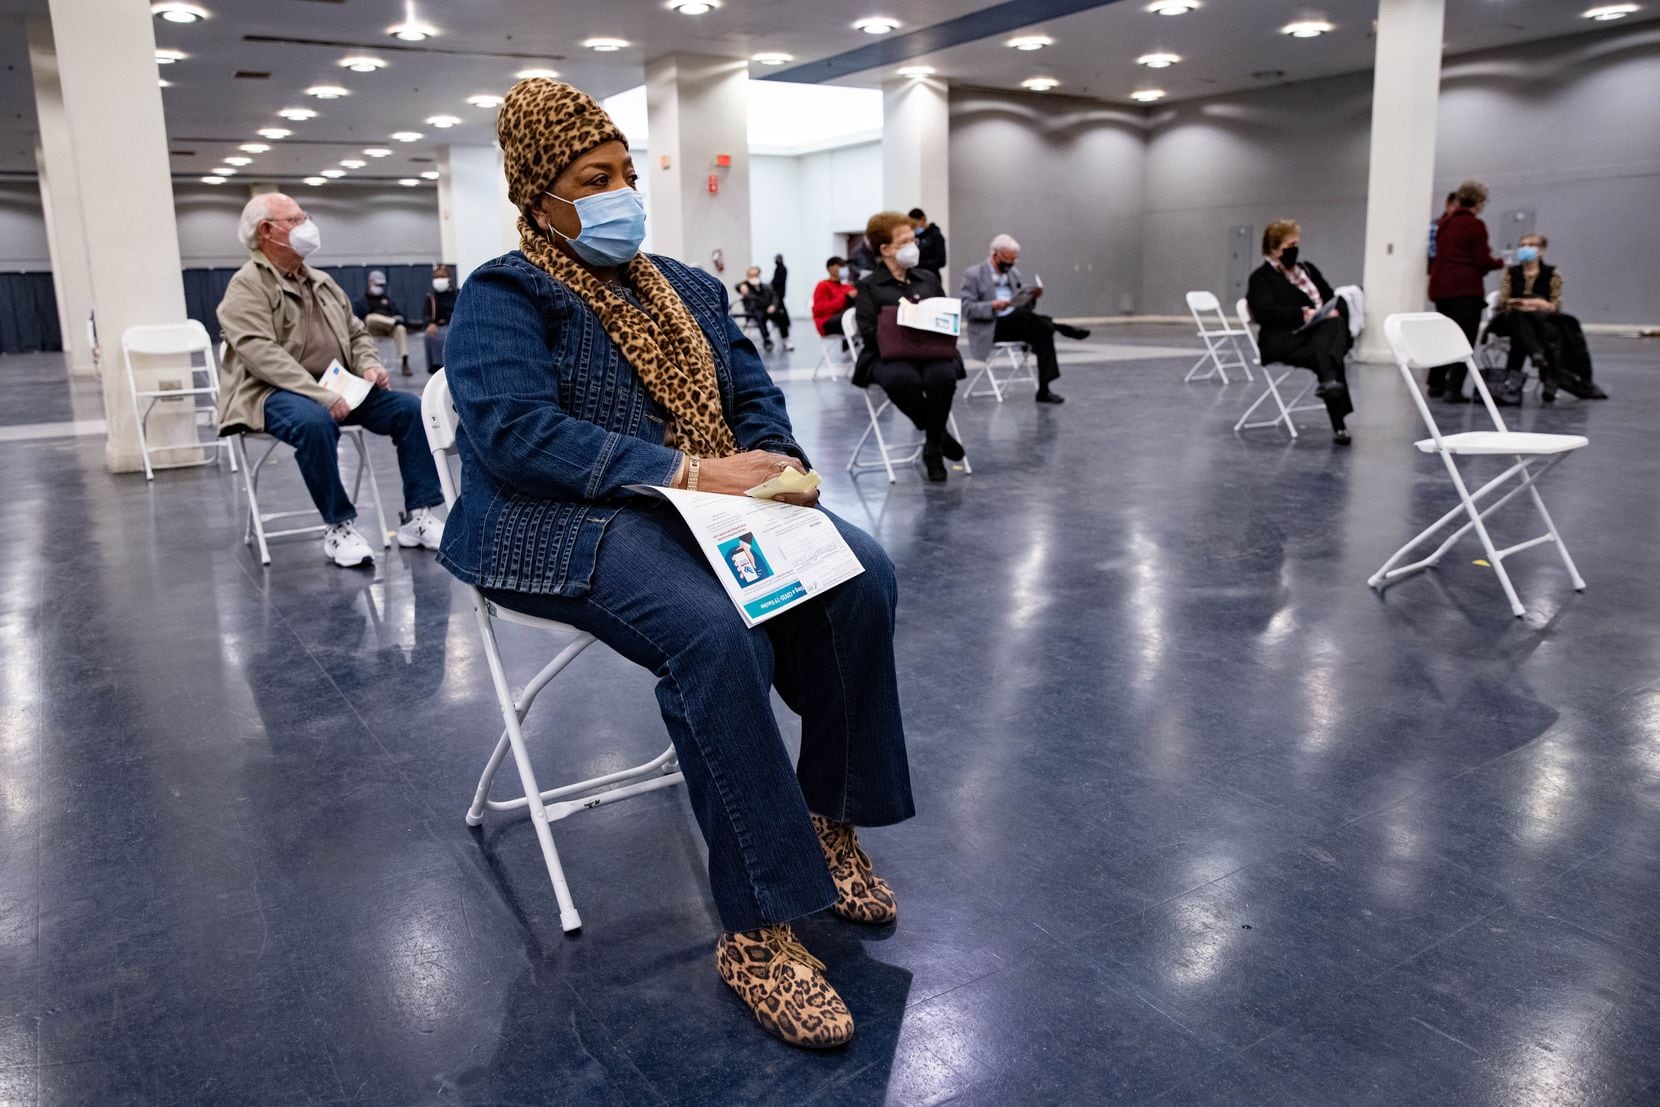 Gladys Rodgers, 77, waits after receiving the COVID-19 vaccine in the post vaccination waiting area at Fair Park in Dallas on Thursday, Jan. 14, 2021. A limited number of COVID-19 vaccine shots will be available Thursday at Fair Park for North Texans 75 and older. (Juan Figueroa/ The Dallas Morning News)